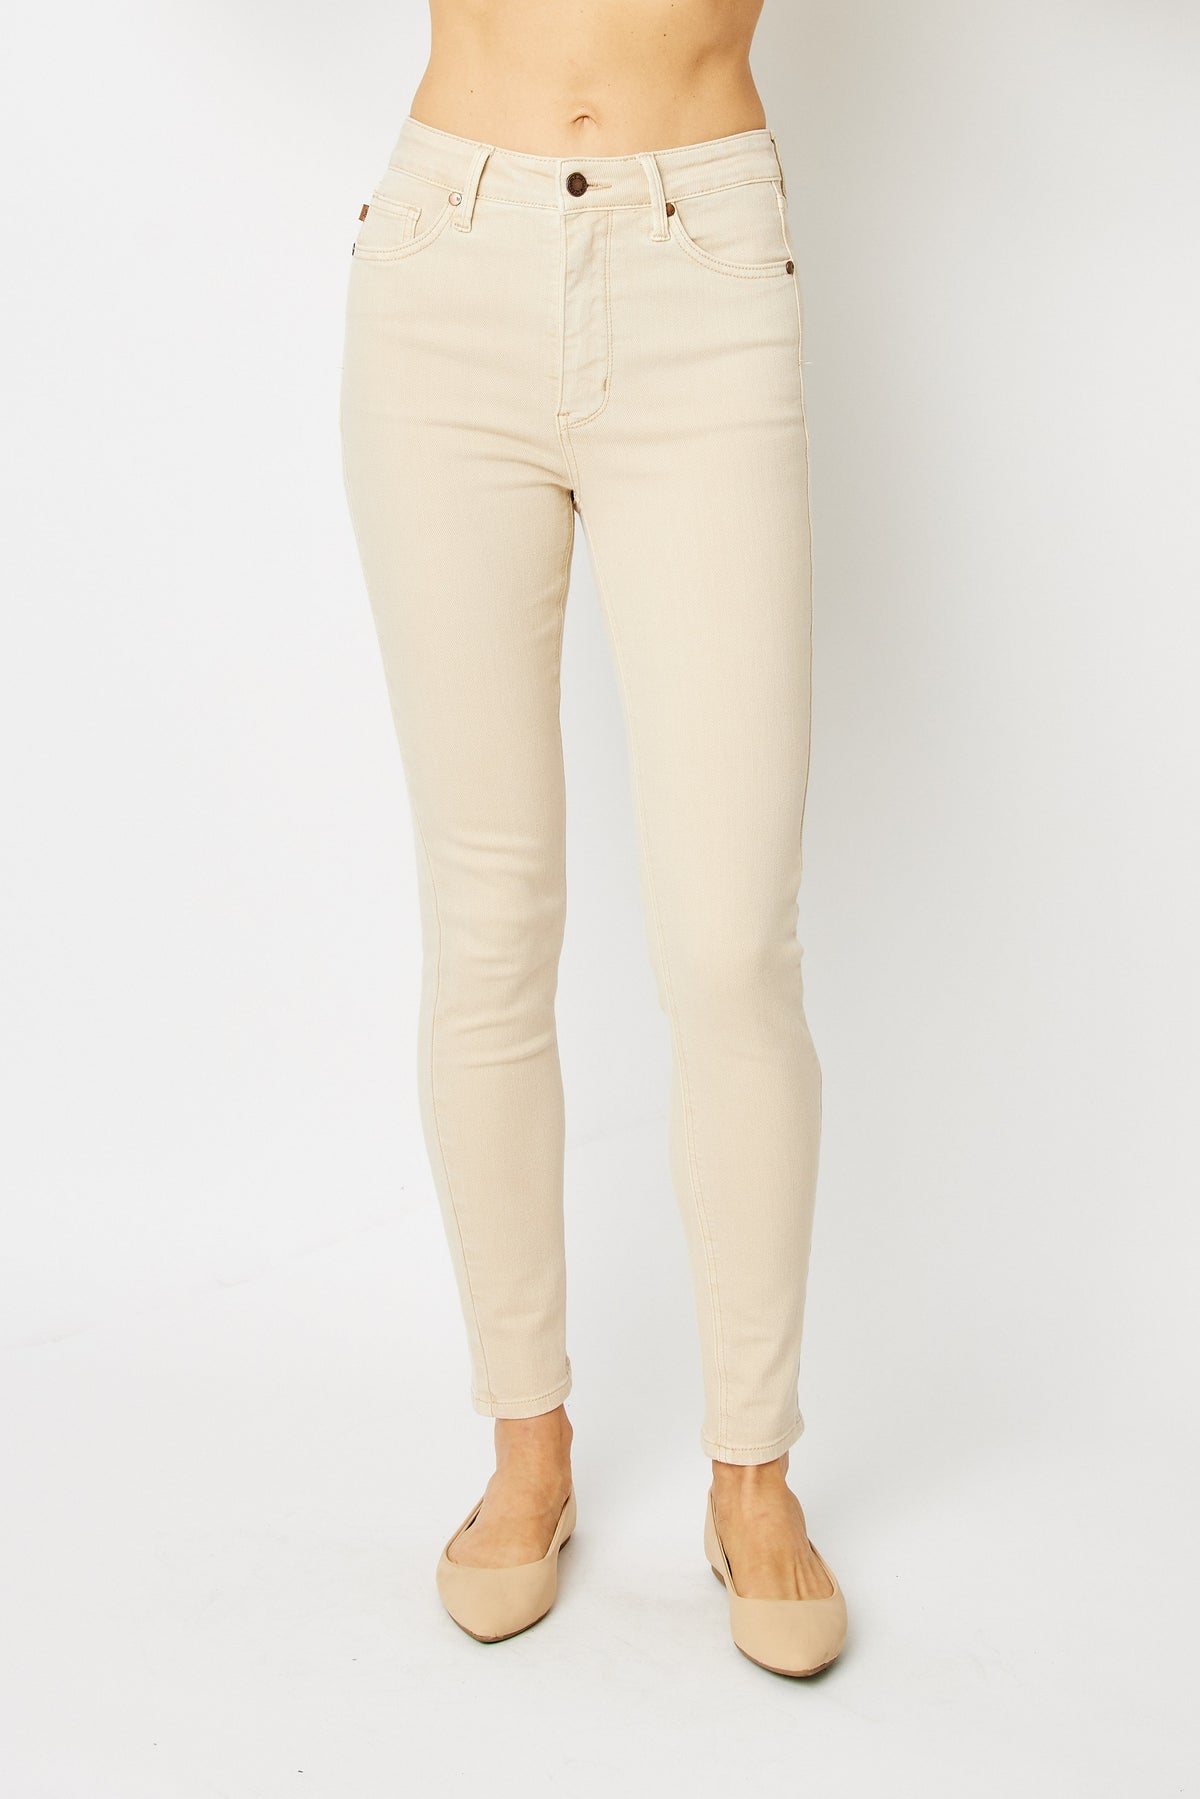 judy blue high wasted garmet dyed tummy control skinny jeans in bone-front view